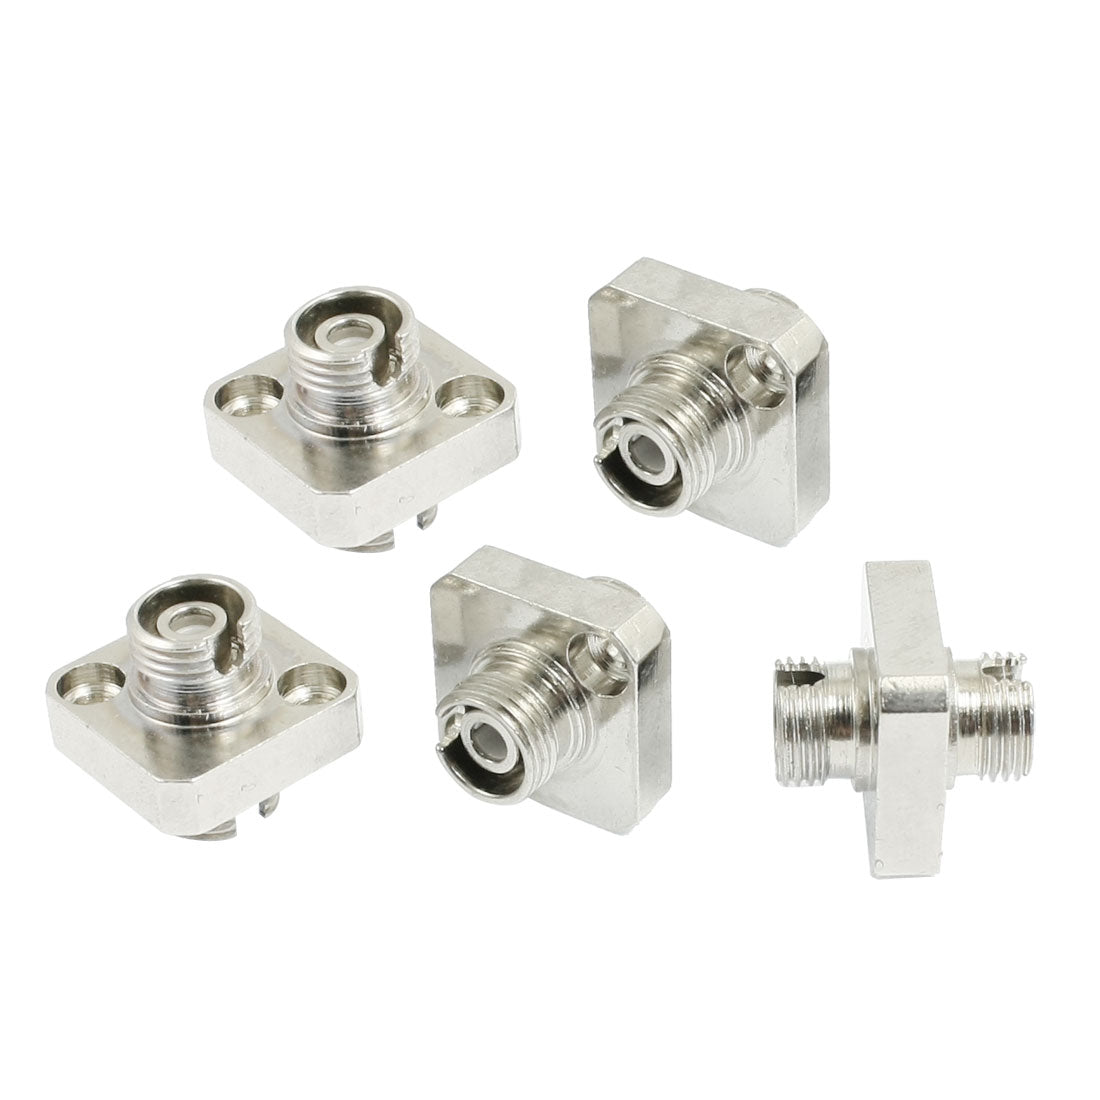 uxcell Uxcell 5 Pcs Fiber Optic Mating Adapter FC Female to Female Connector